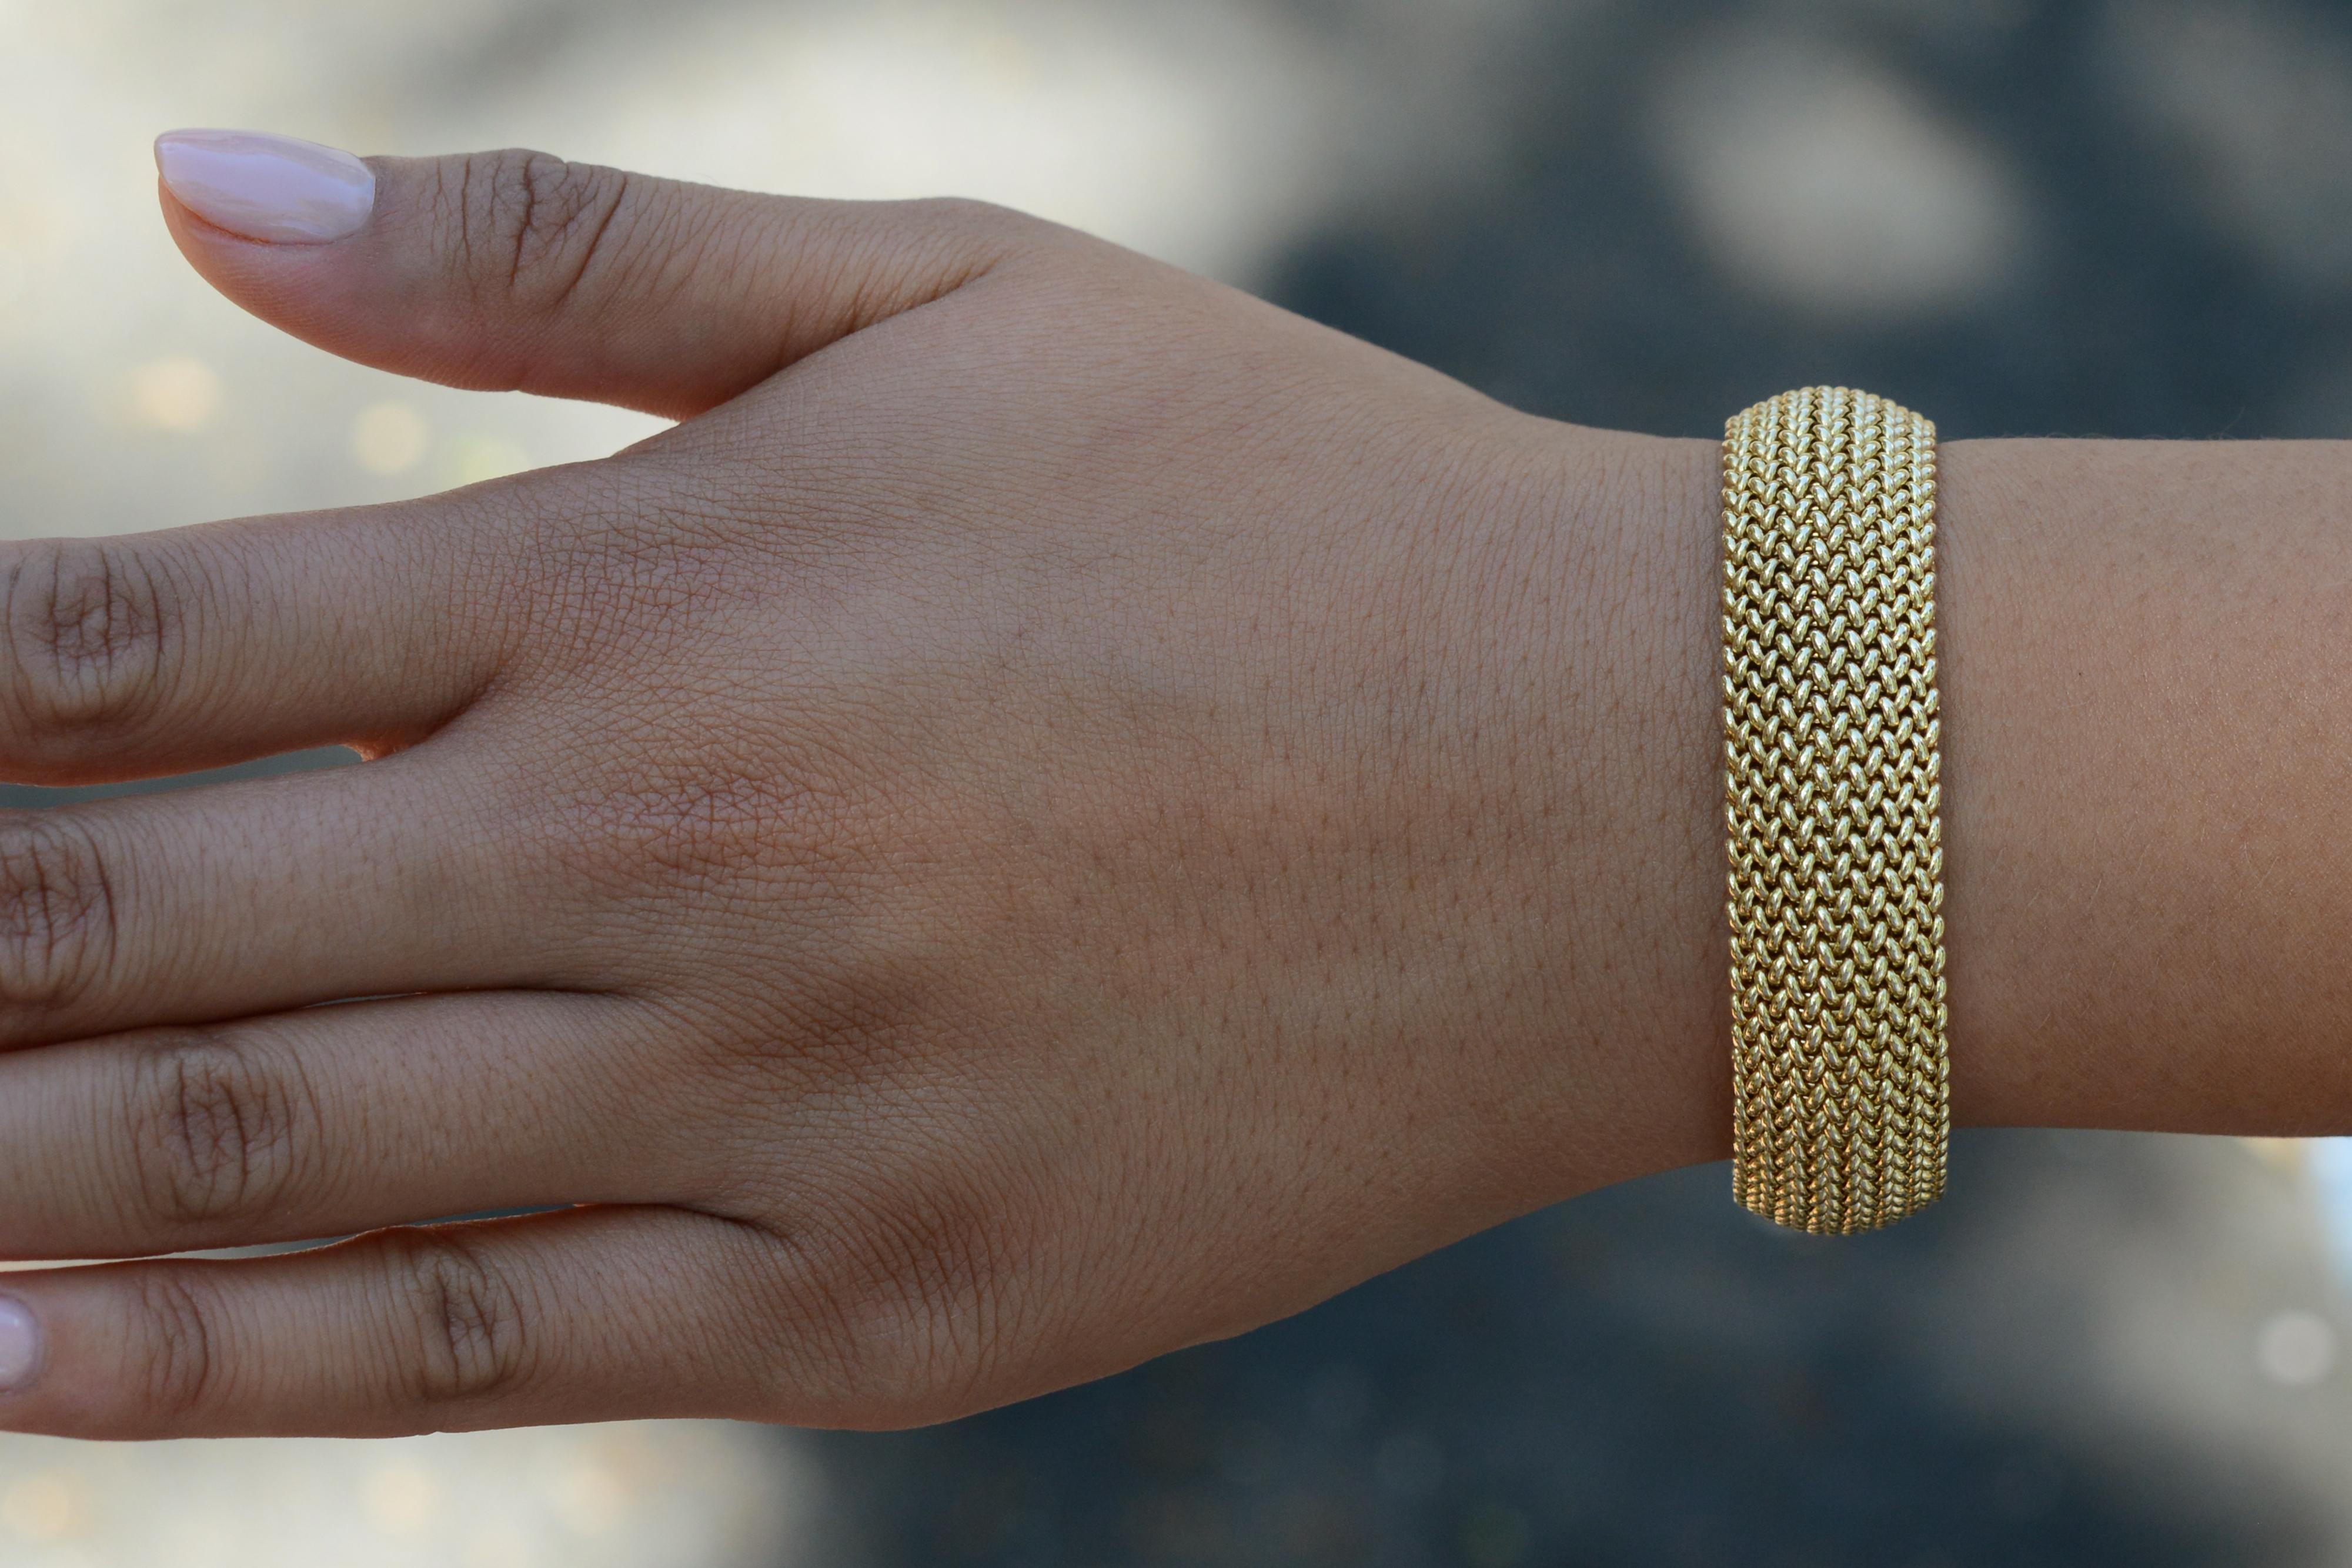 This authentic 1970s vintage, wide woven bracelet is a luxurious addition to any jewelry collection. Crafted with solid 14 karat yellow gold and a classic Riso (rice) Italian design, this substantial piece provides excellent coverage and boasts an